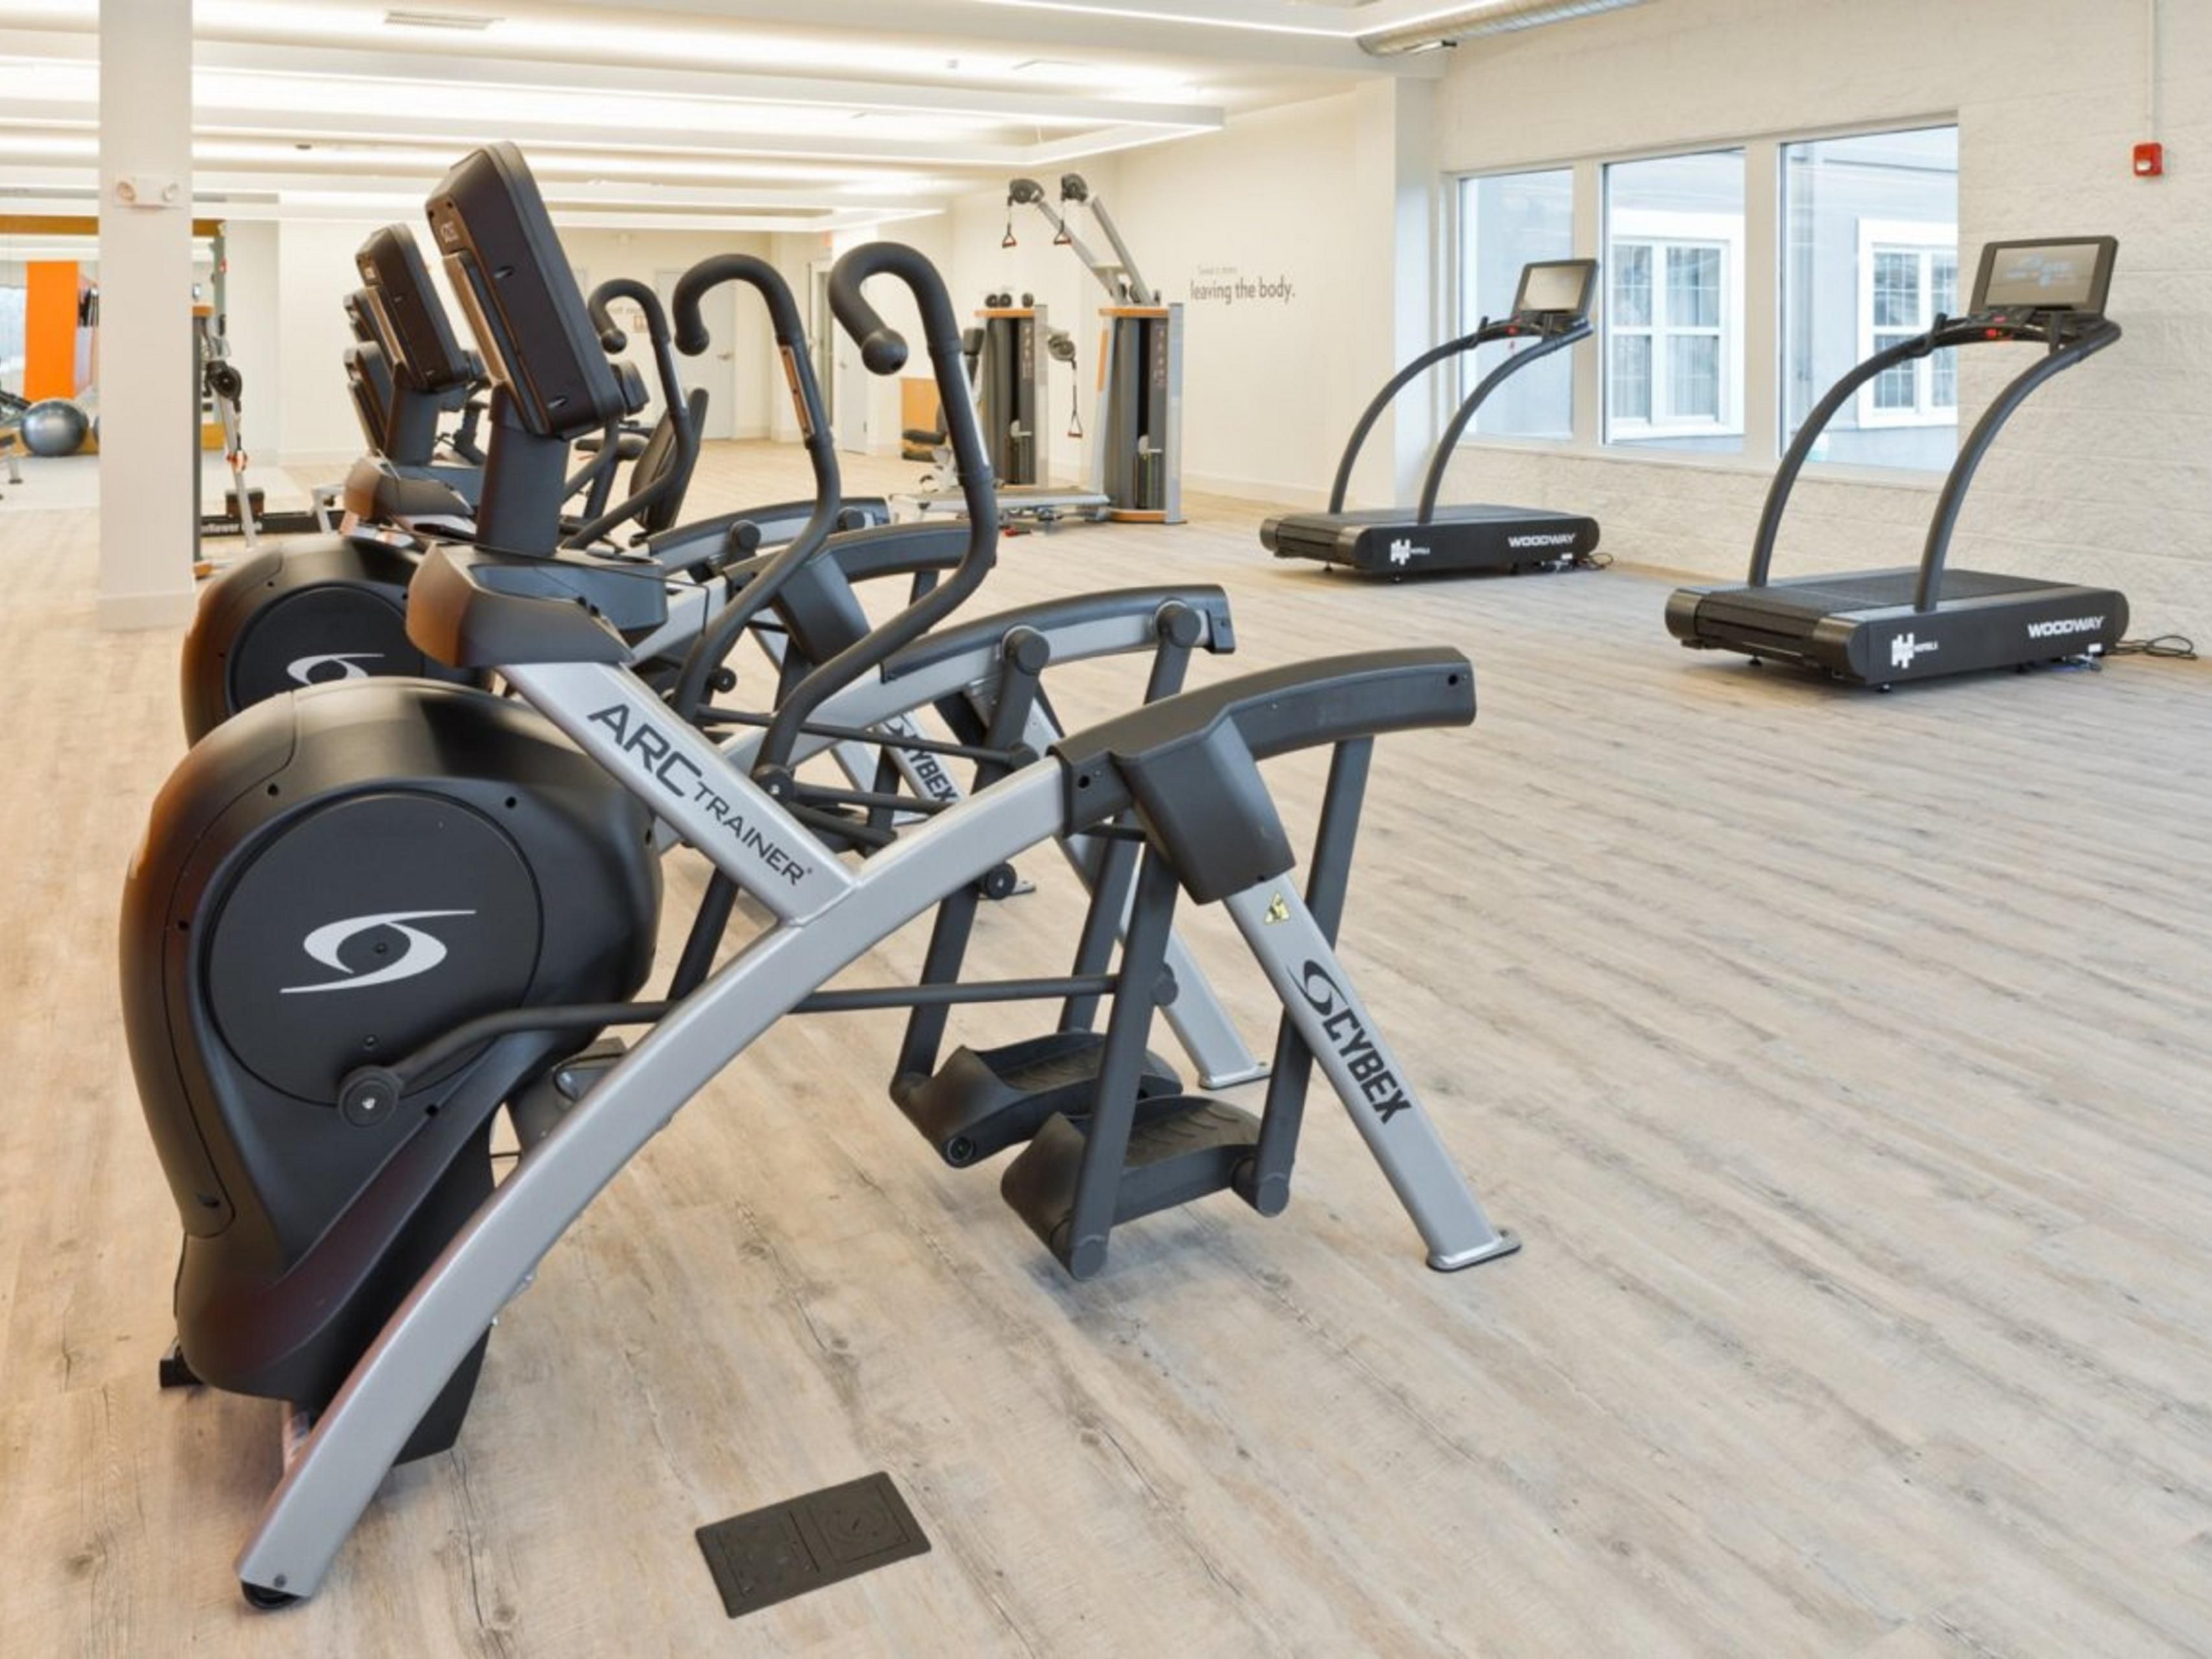 Our gym is open 24/7, allowing you to exercise whenever your schedule permits. Located near the lobby, our hotel's athletic studio has everything you need to get in full-body workouts. Best-in-class equipment, including cardio machines and weights, are available so you can maintain your fitness routine while away from home.
